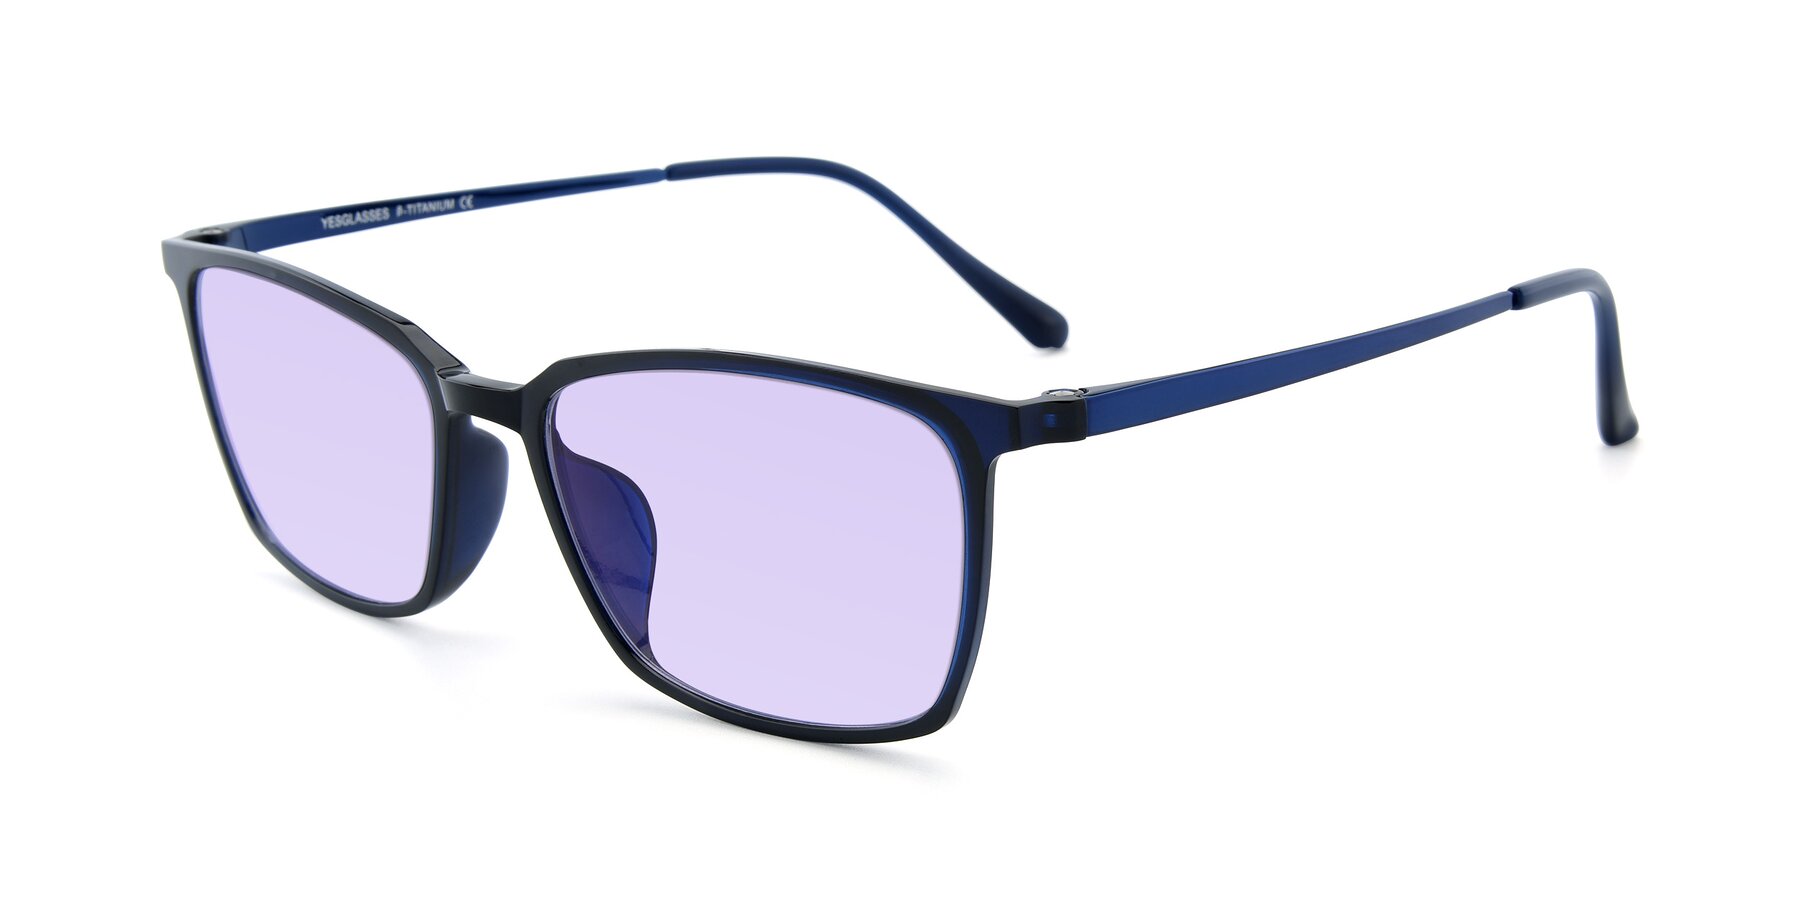 Angle of XC-5009 in Blue with Light Purple Tinted Lenses